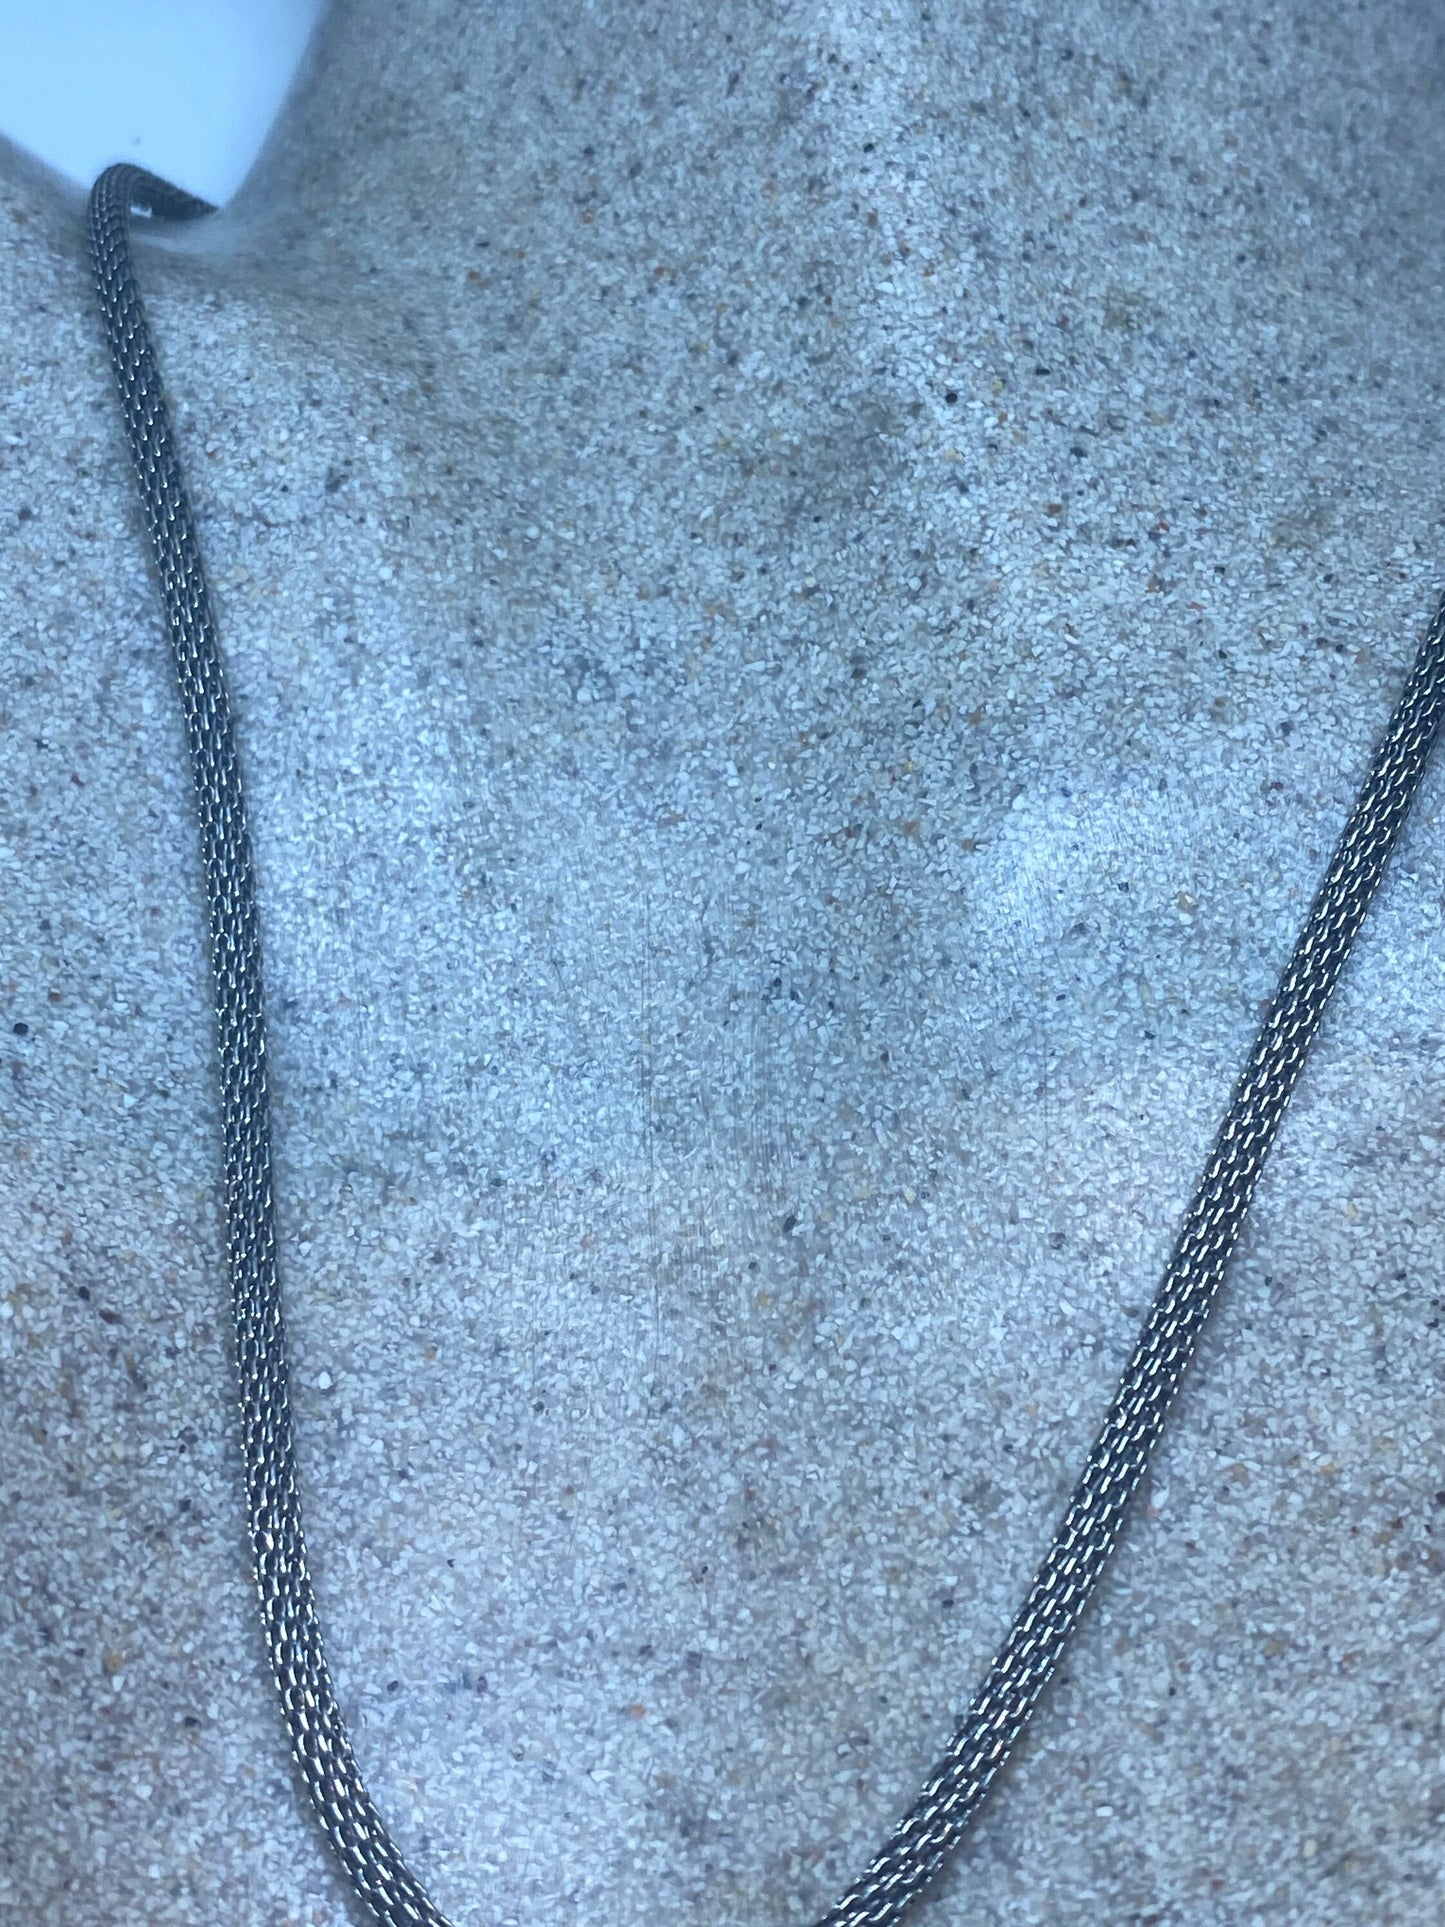 Vintage Snake Chain 18 Inch 925 Sterling Silver Necklace